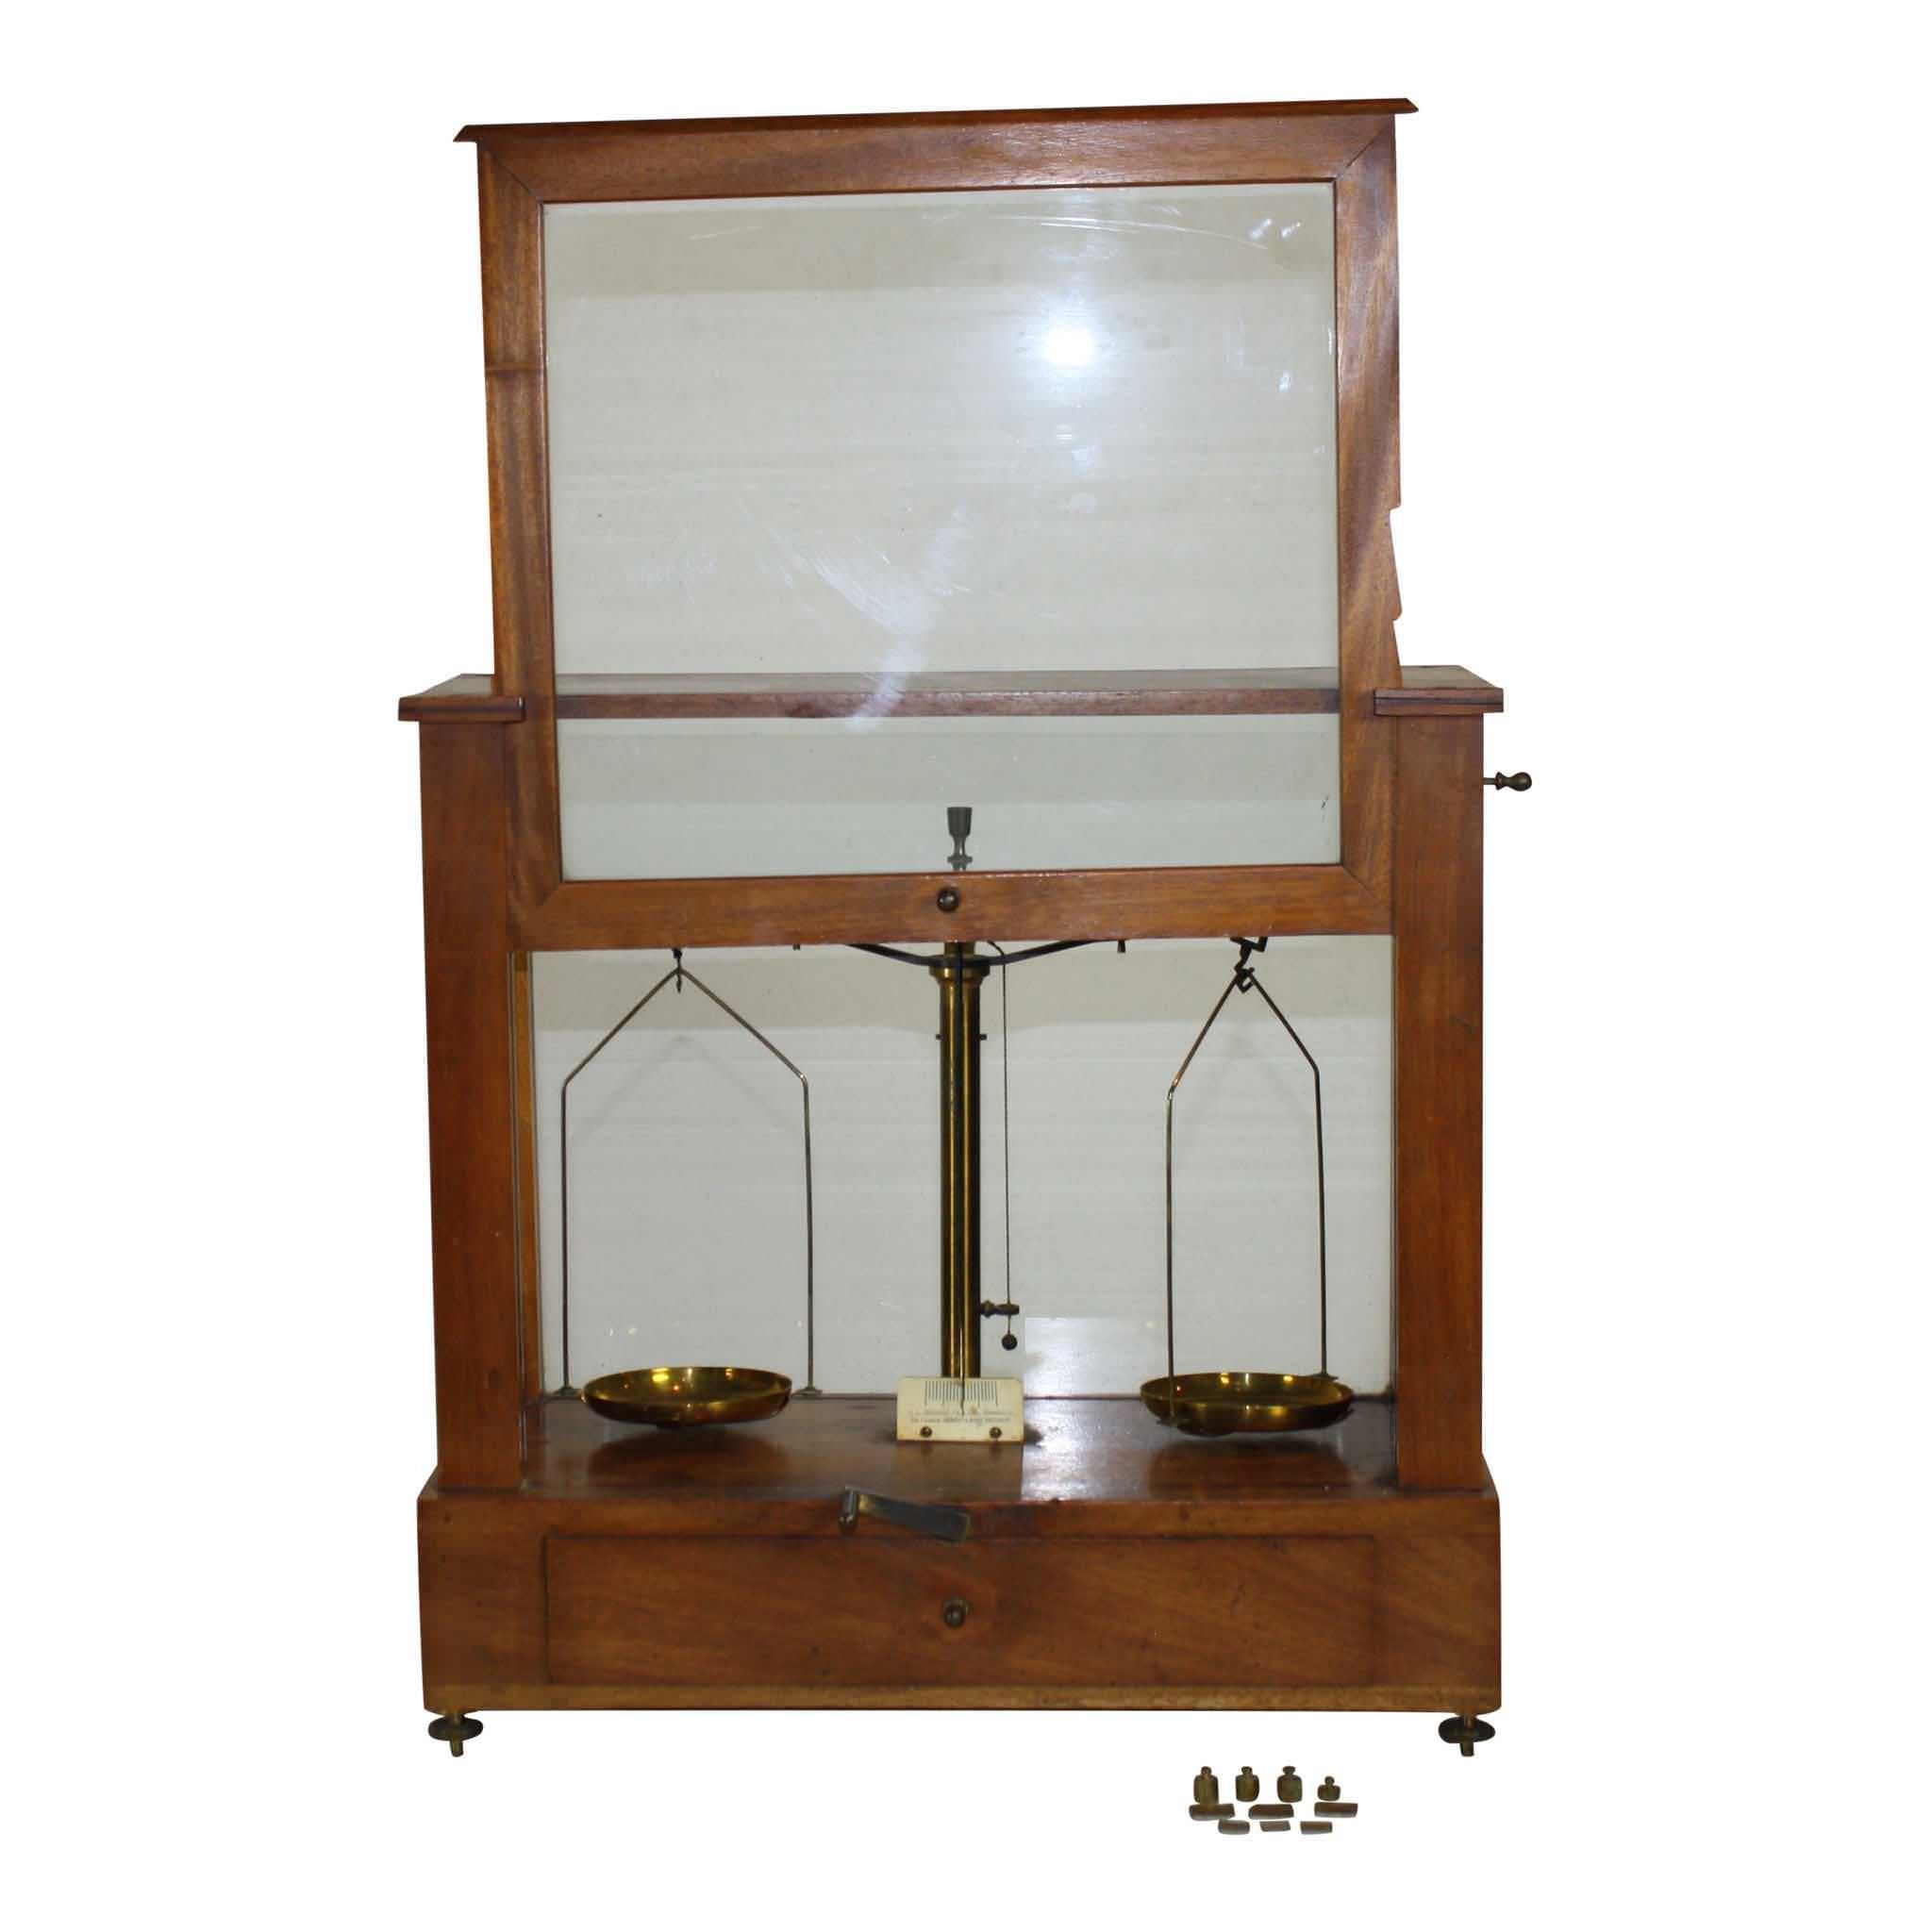 Pharmaceutical/Apothecary Scale in Glass Box with Weights